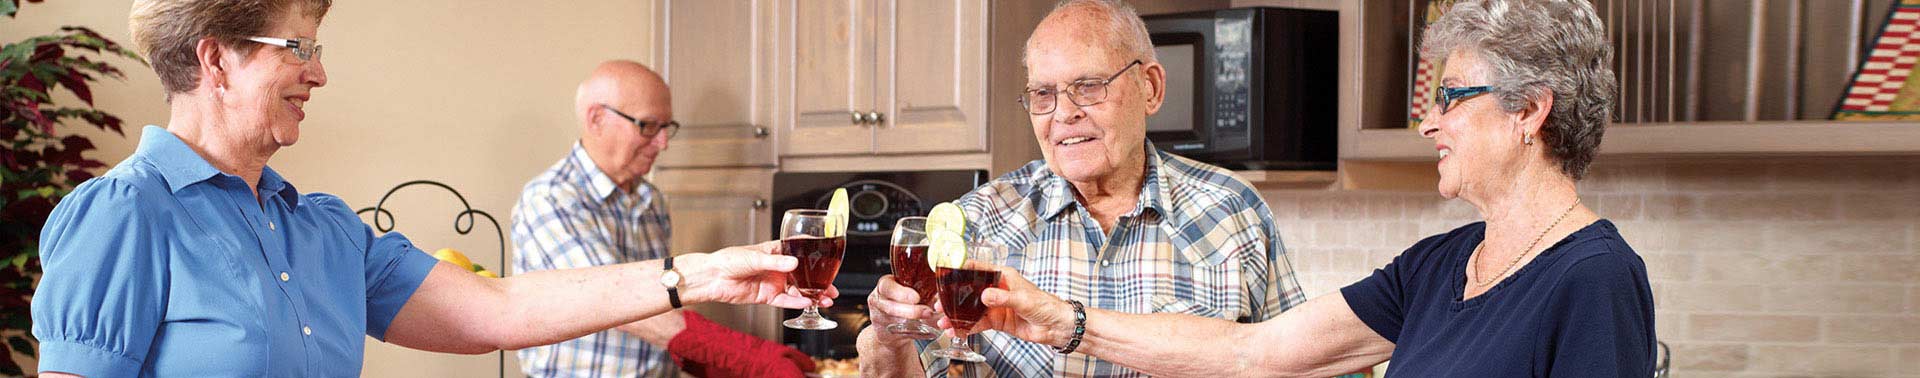 Seasons residents sayings cheers to a drink in the kitchen